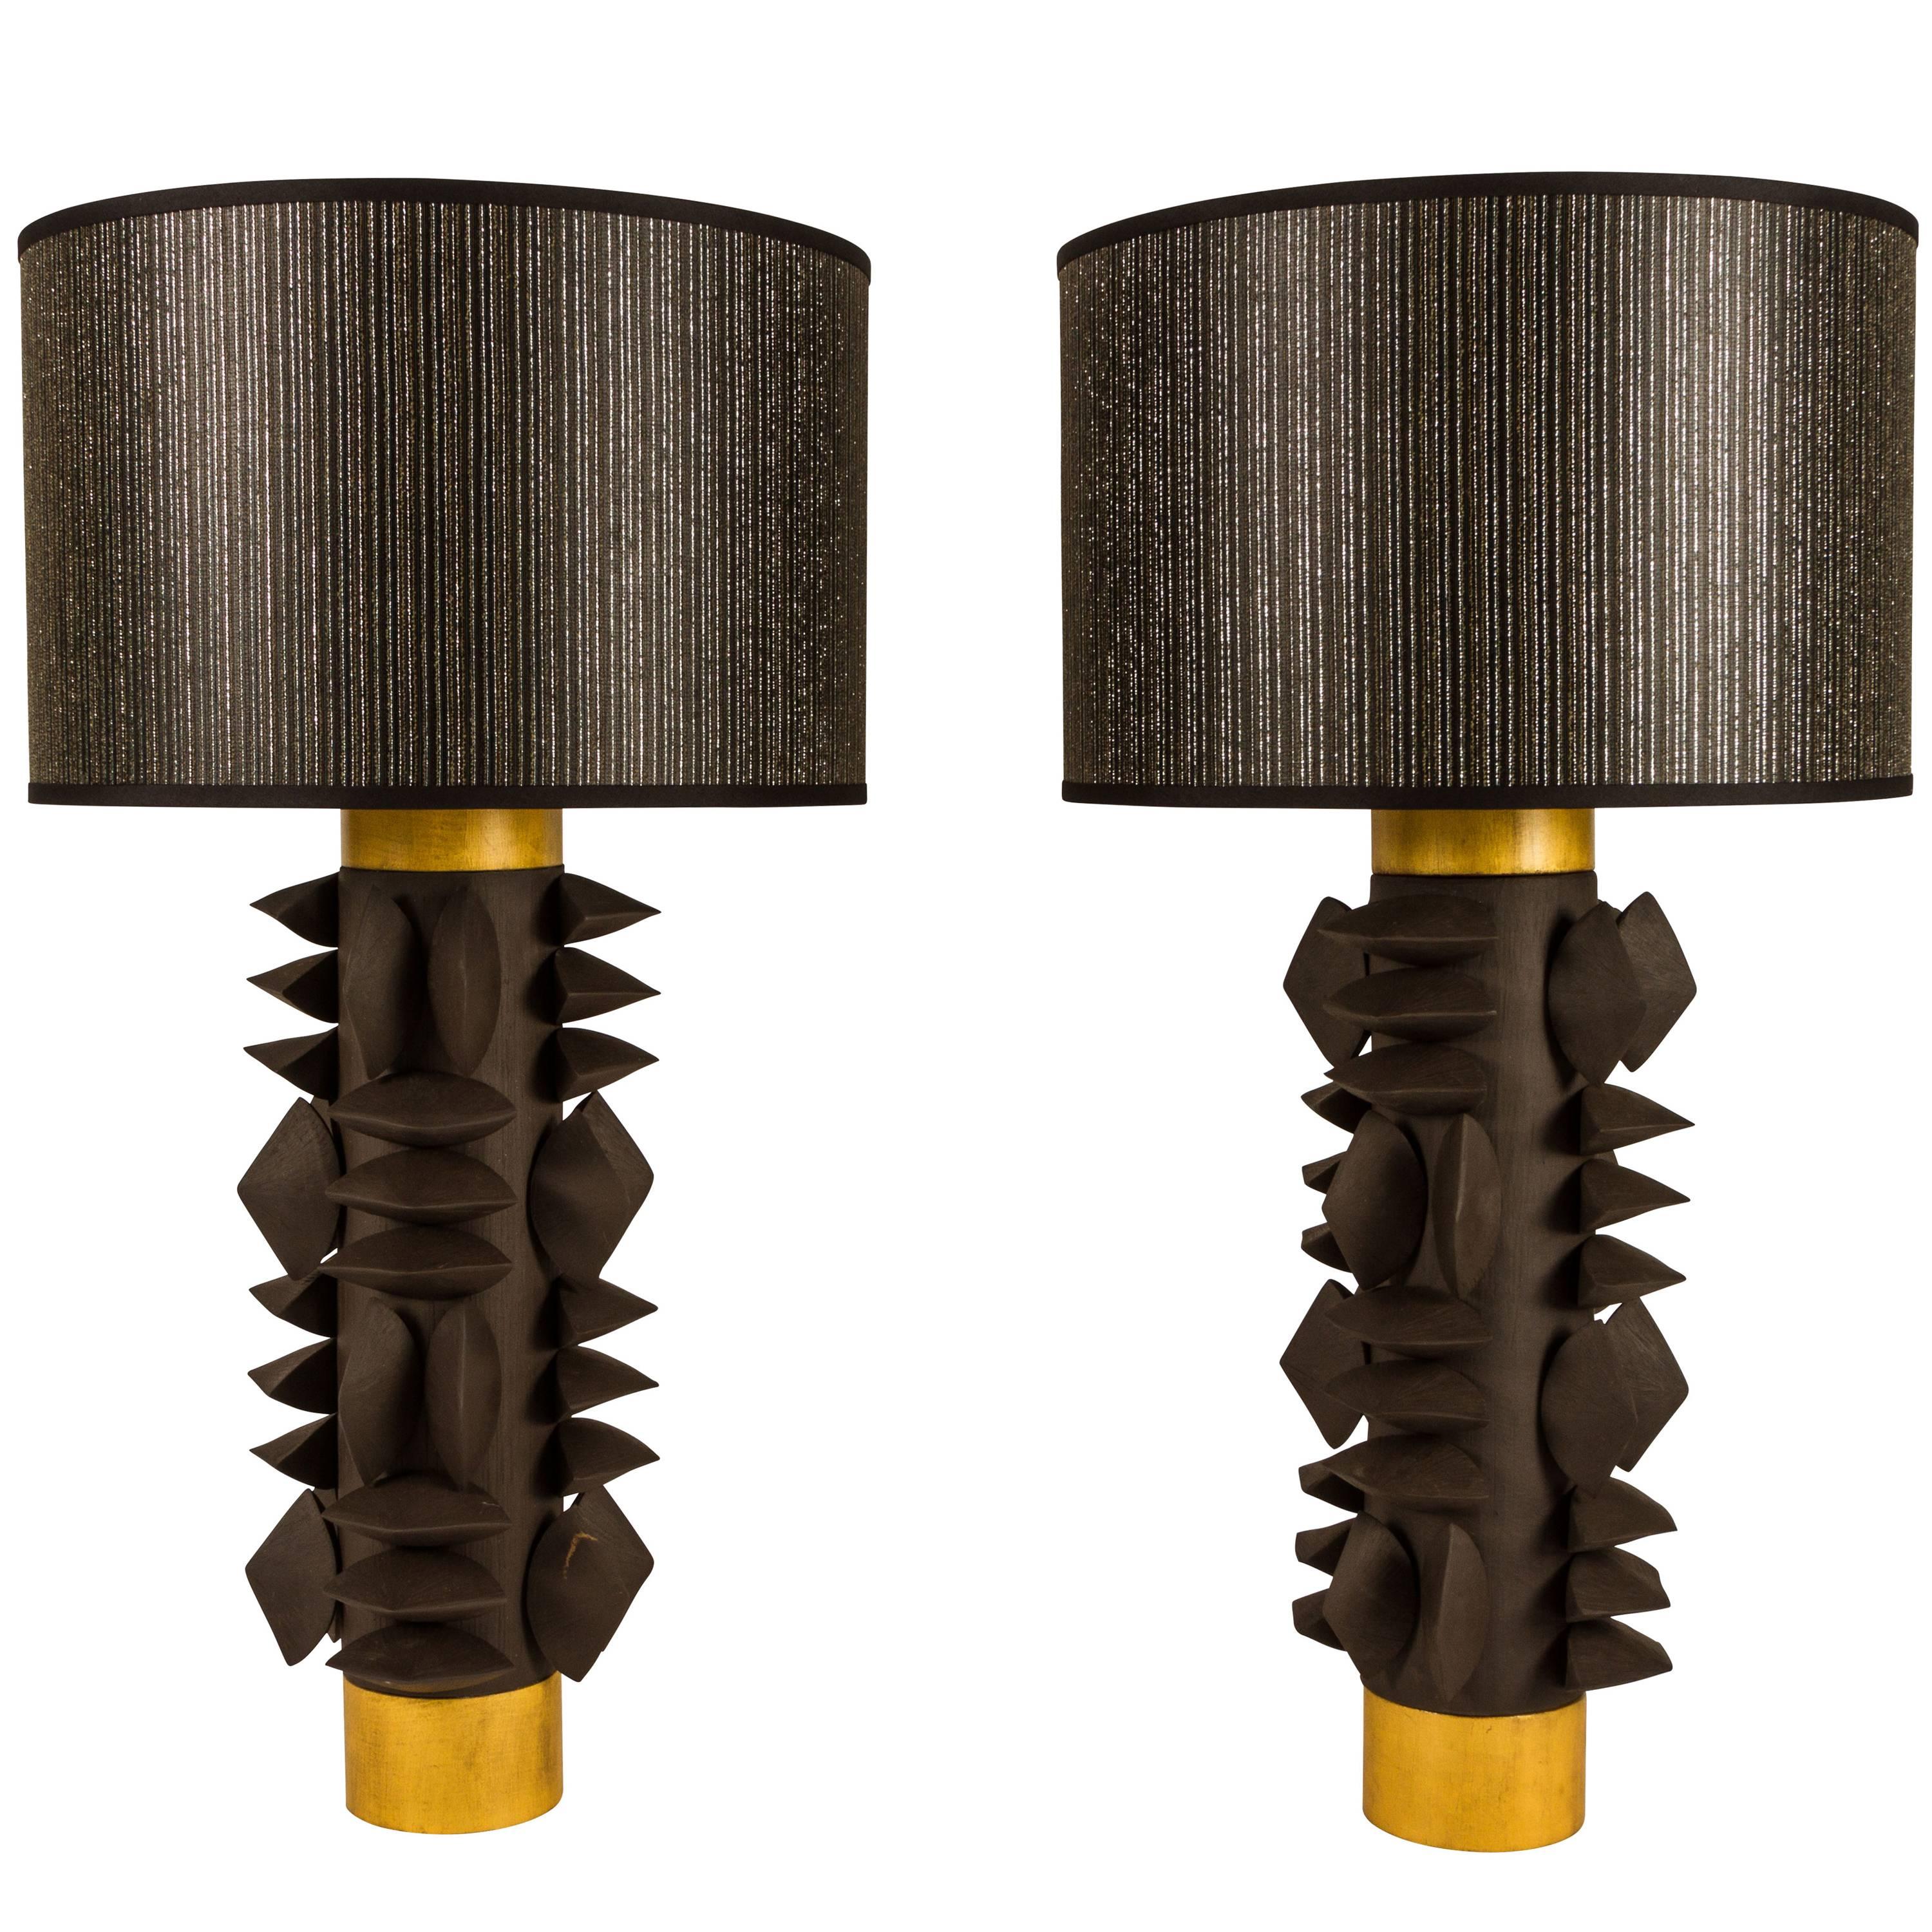  "Titia" Table Lamp by Dragonette Private Label For Sale